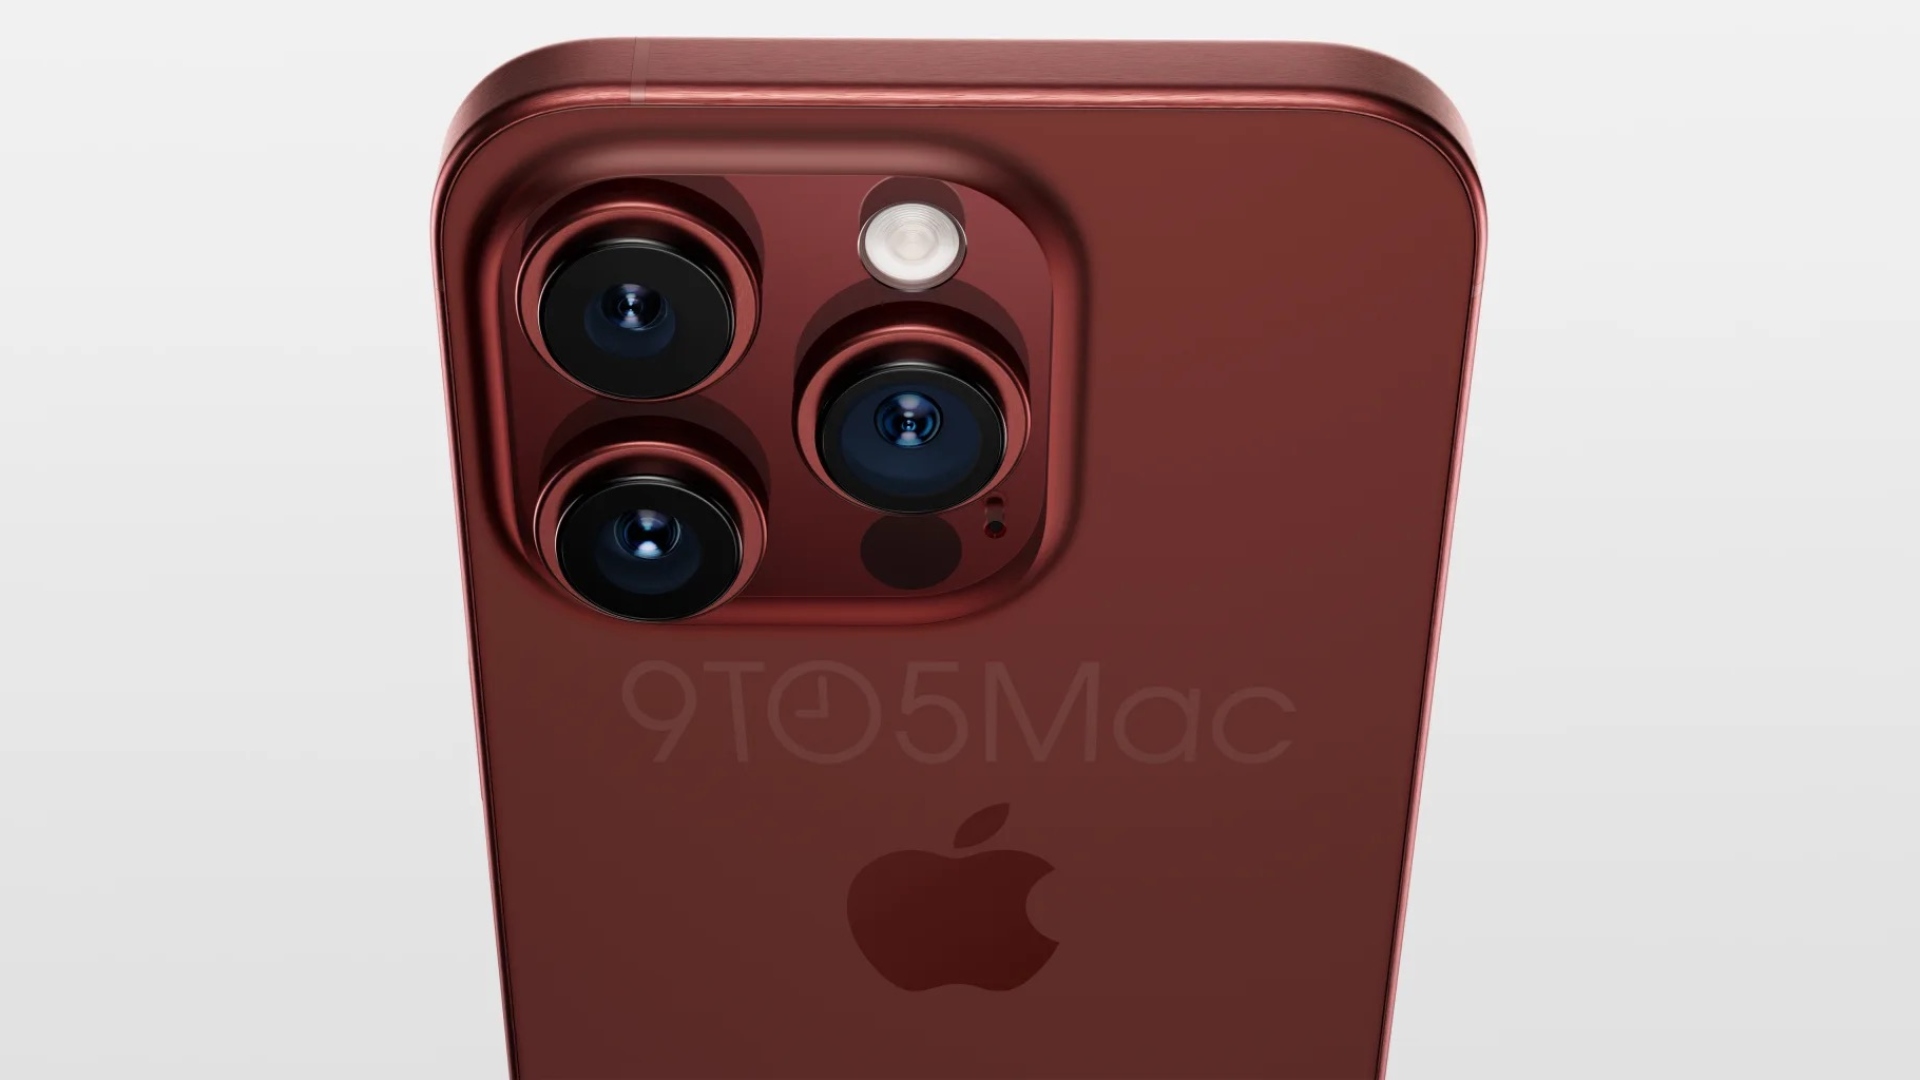 15 Pro new deep red color render 1